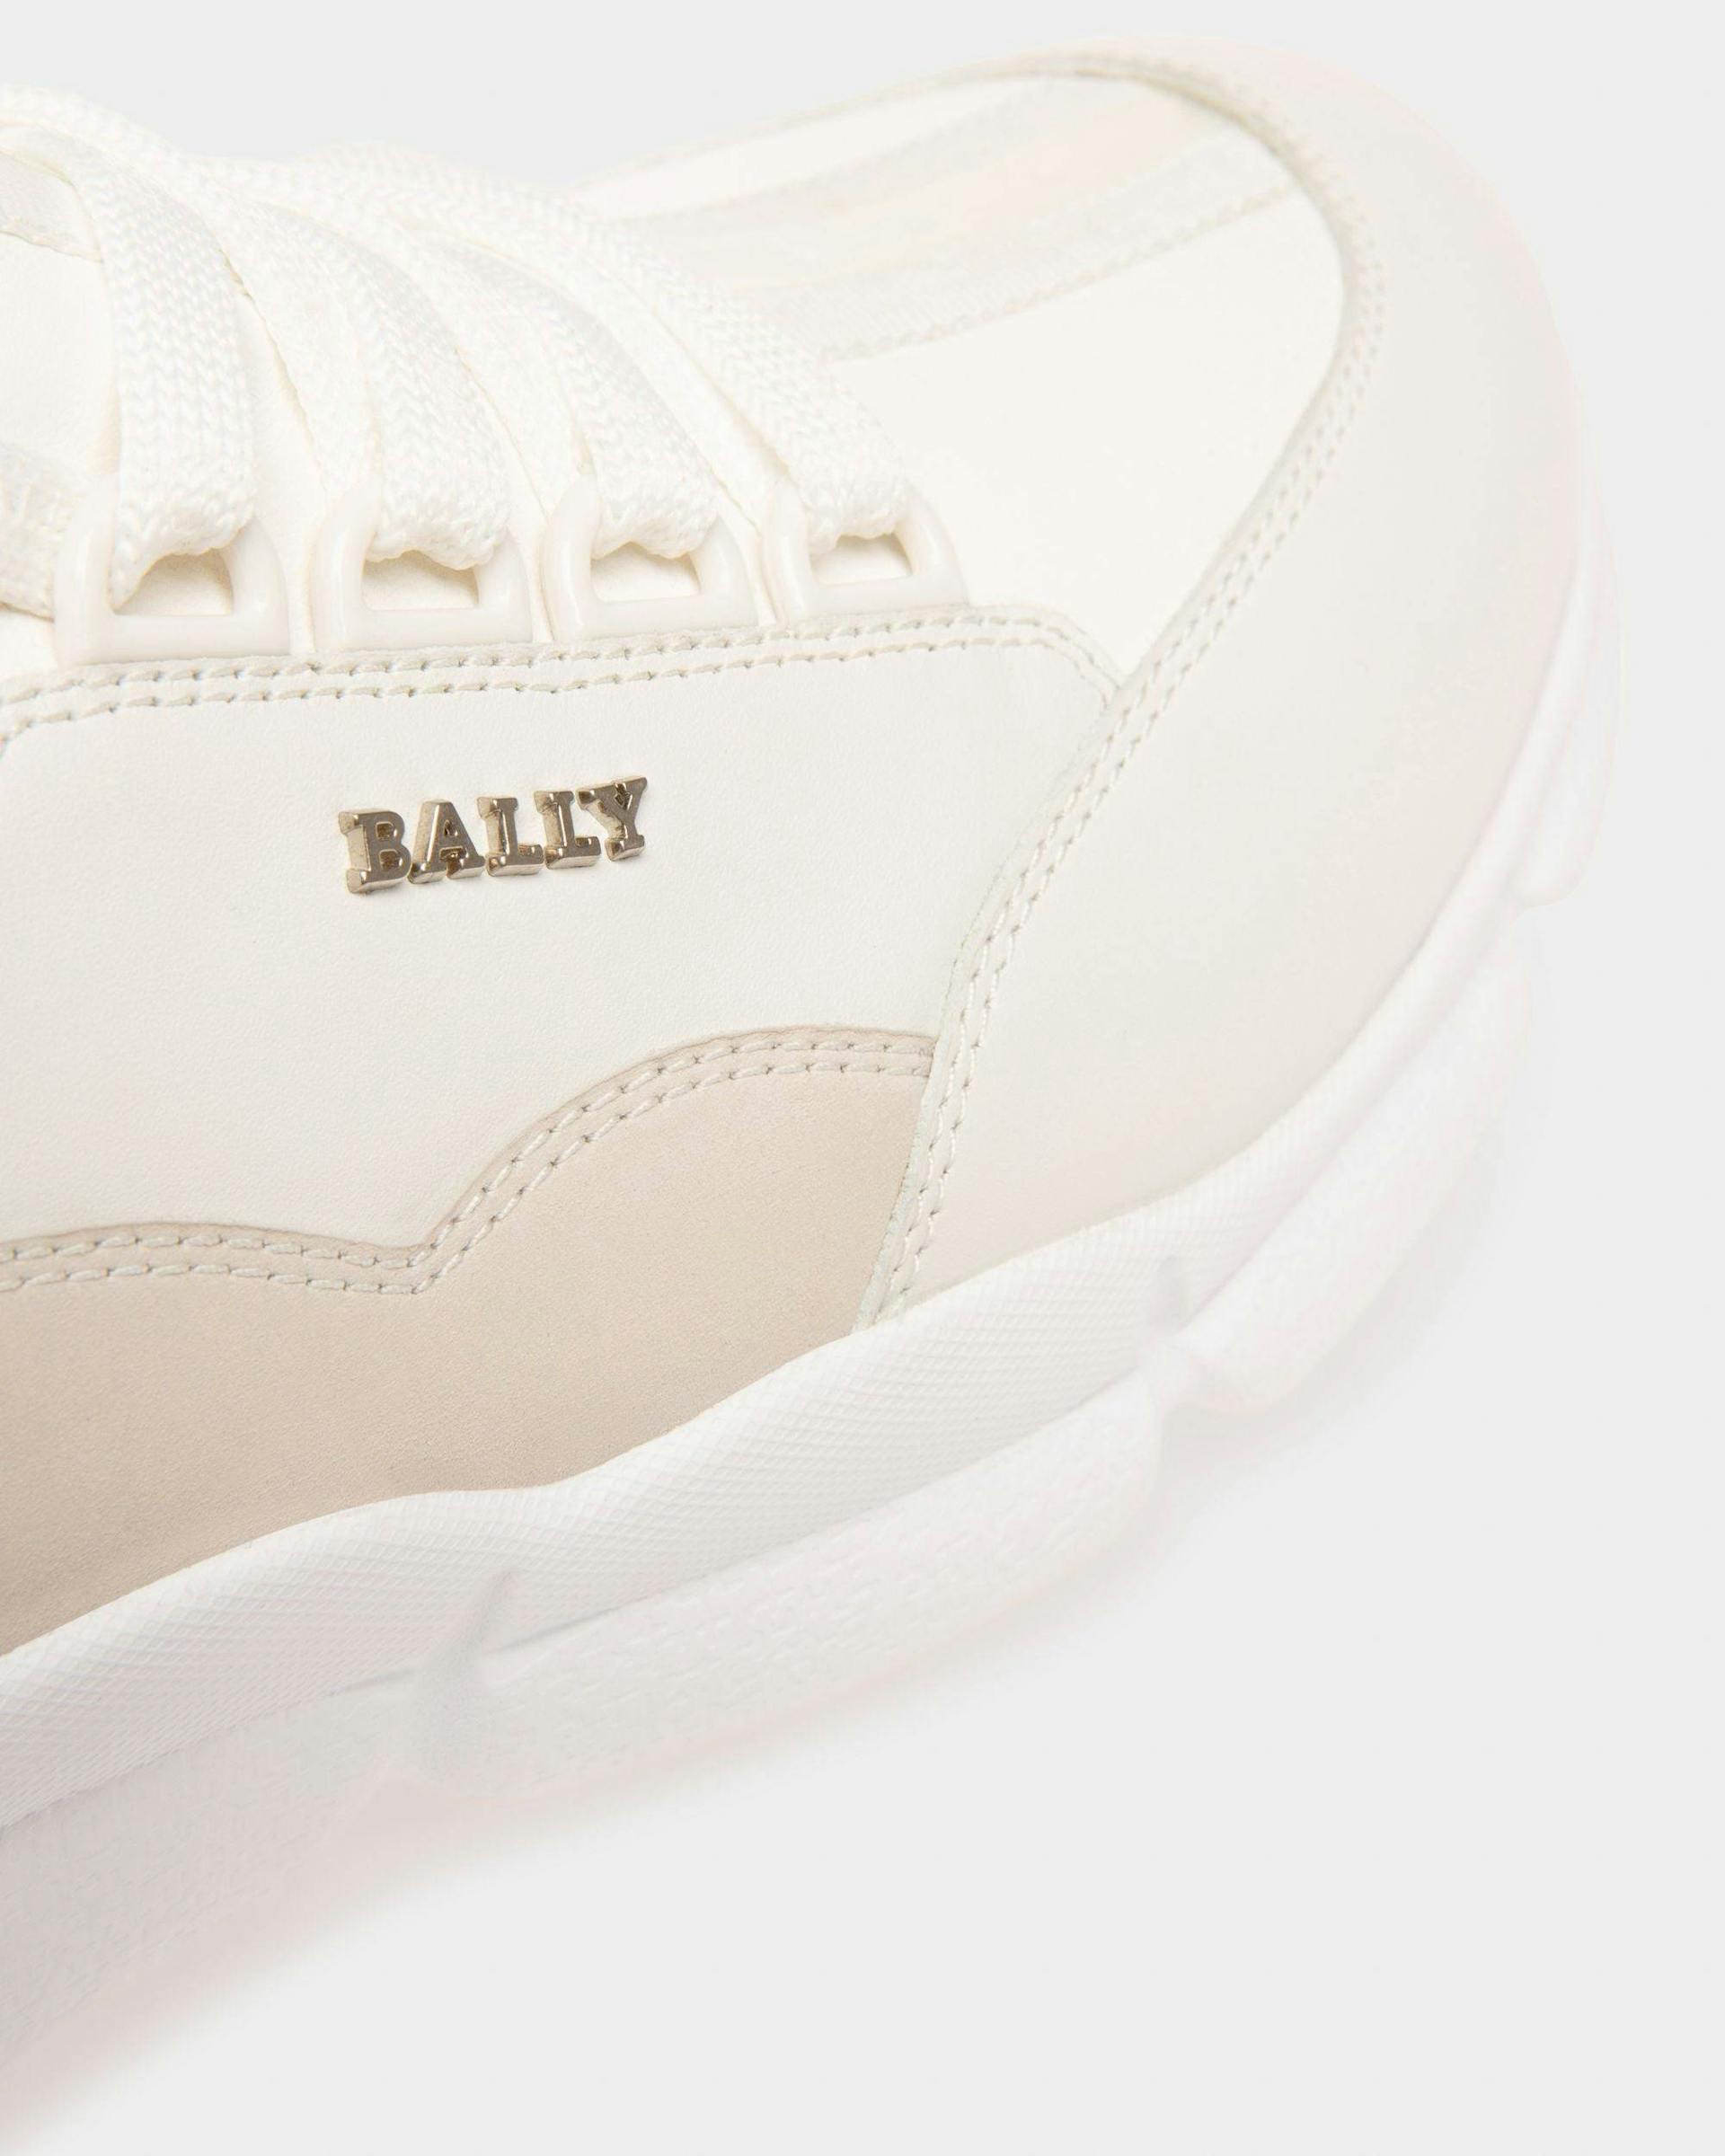 Bally Escapes Passe Partout Leather Sneakers In White - Men's - Bally - 05